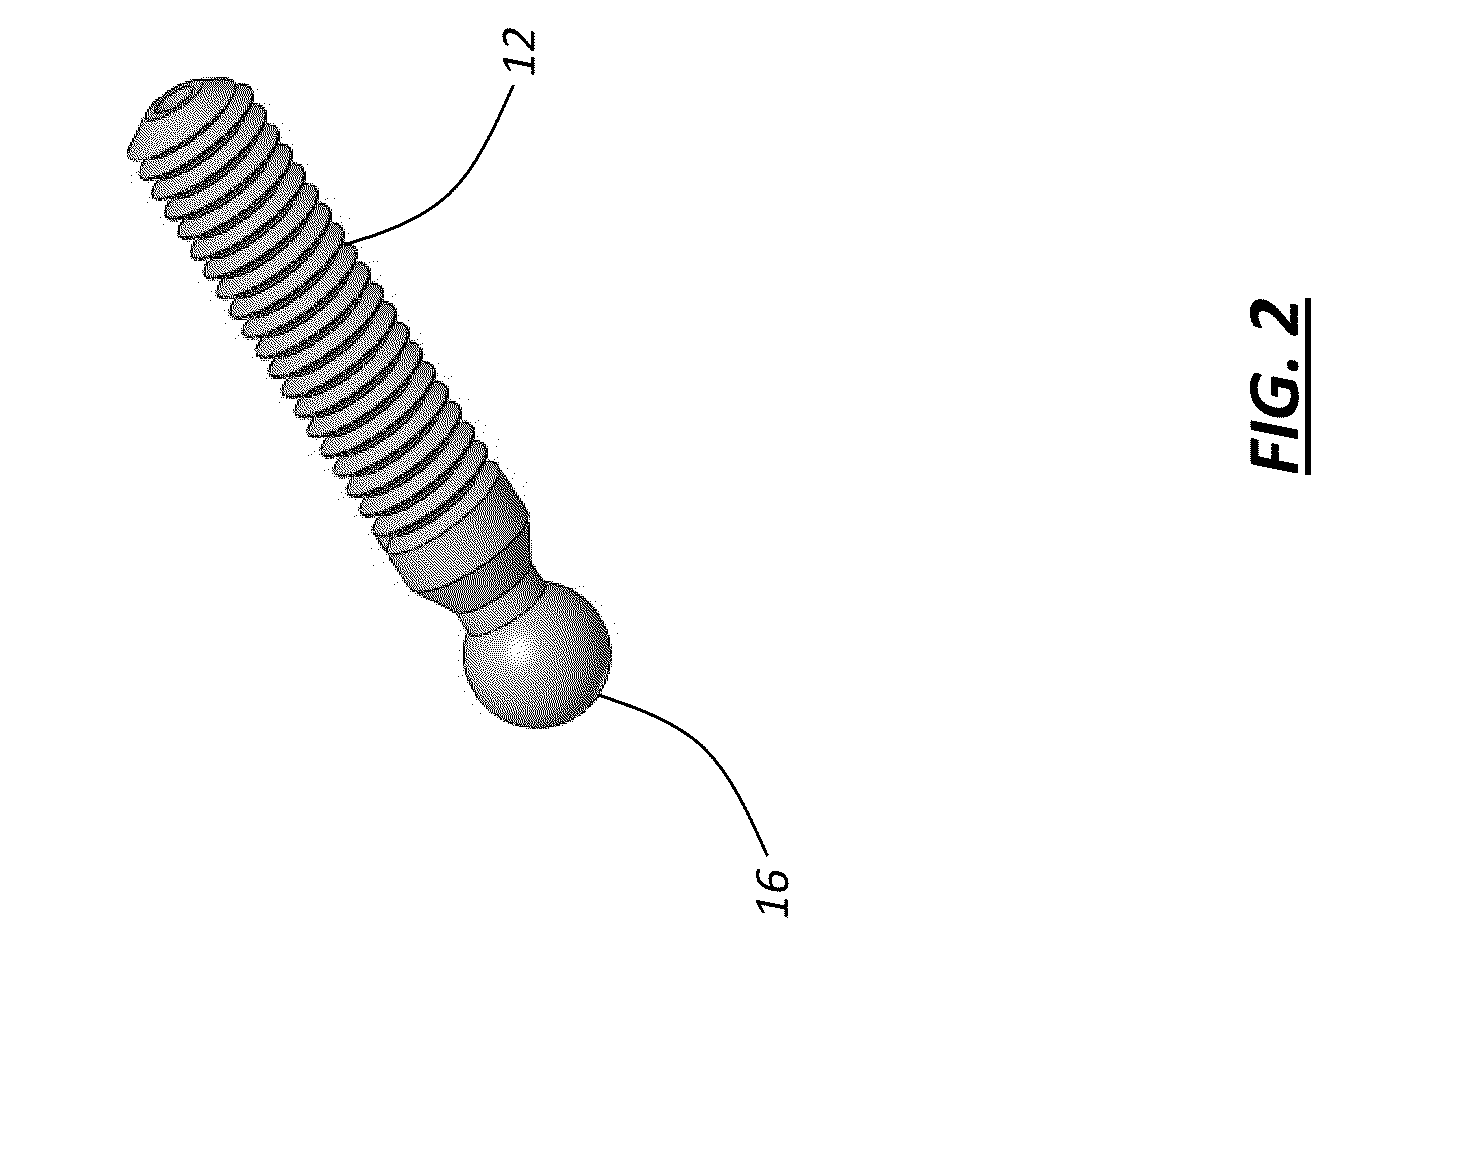 Transfacet fixation assembly and related surgical methods